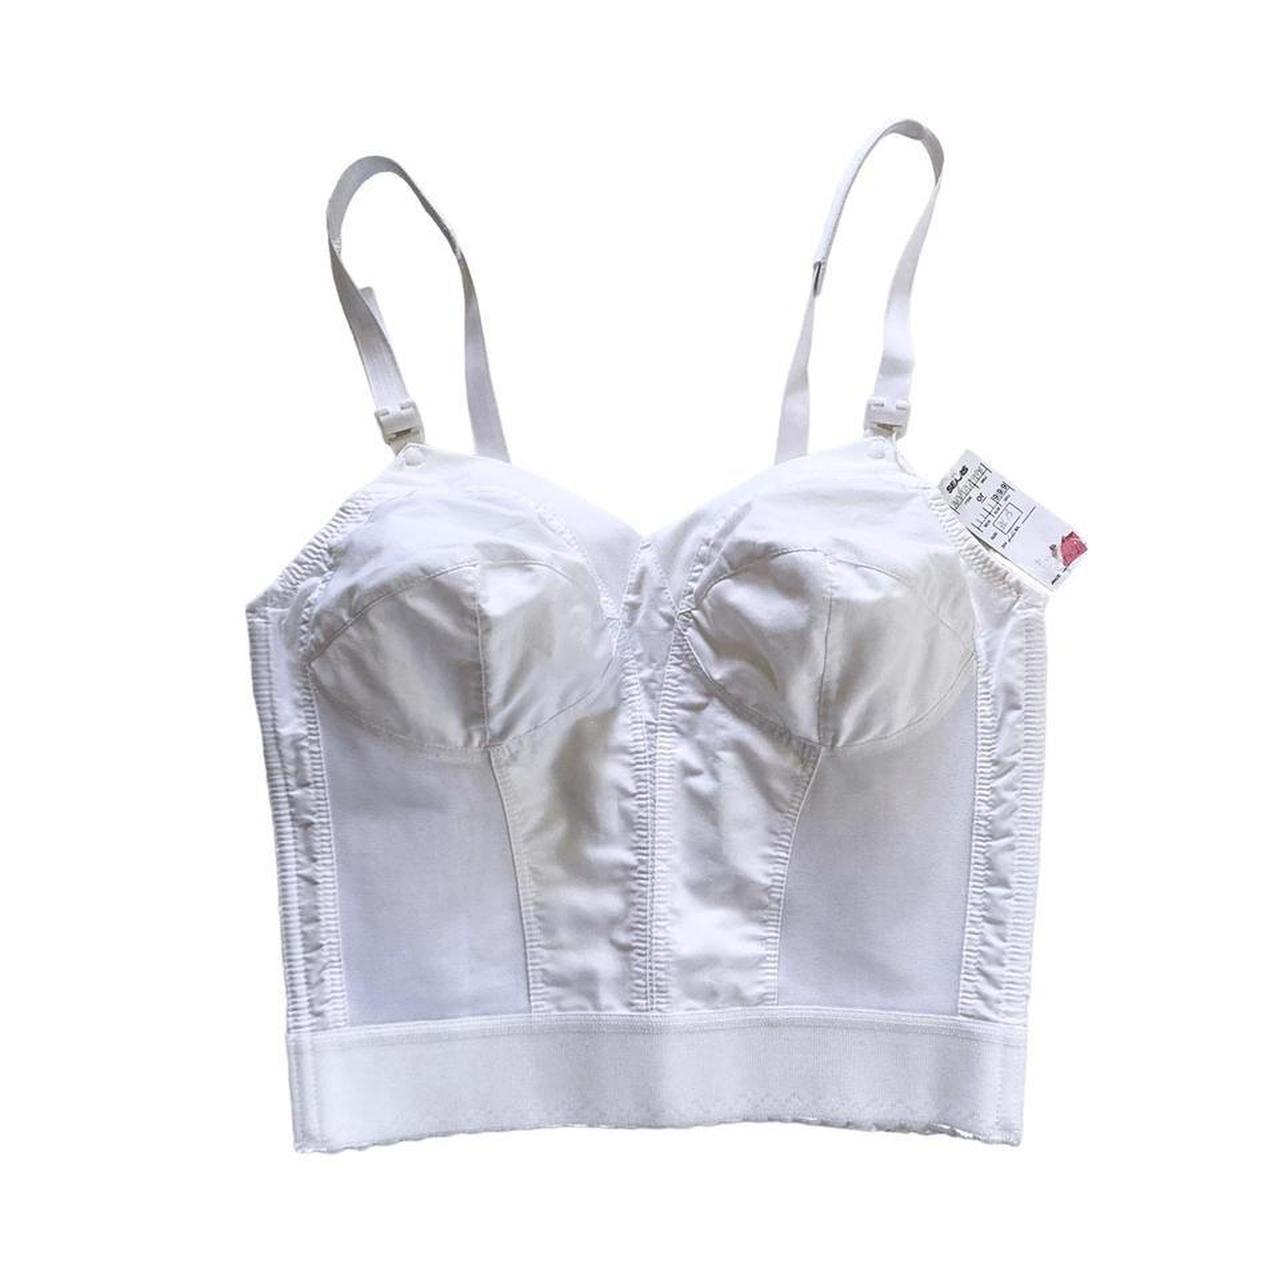 NWT 70s 80s Vintage White Bustier Bra Made by - Depop